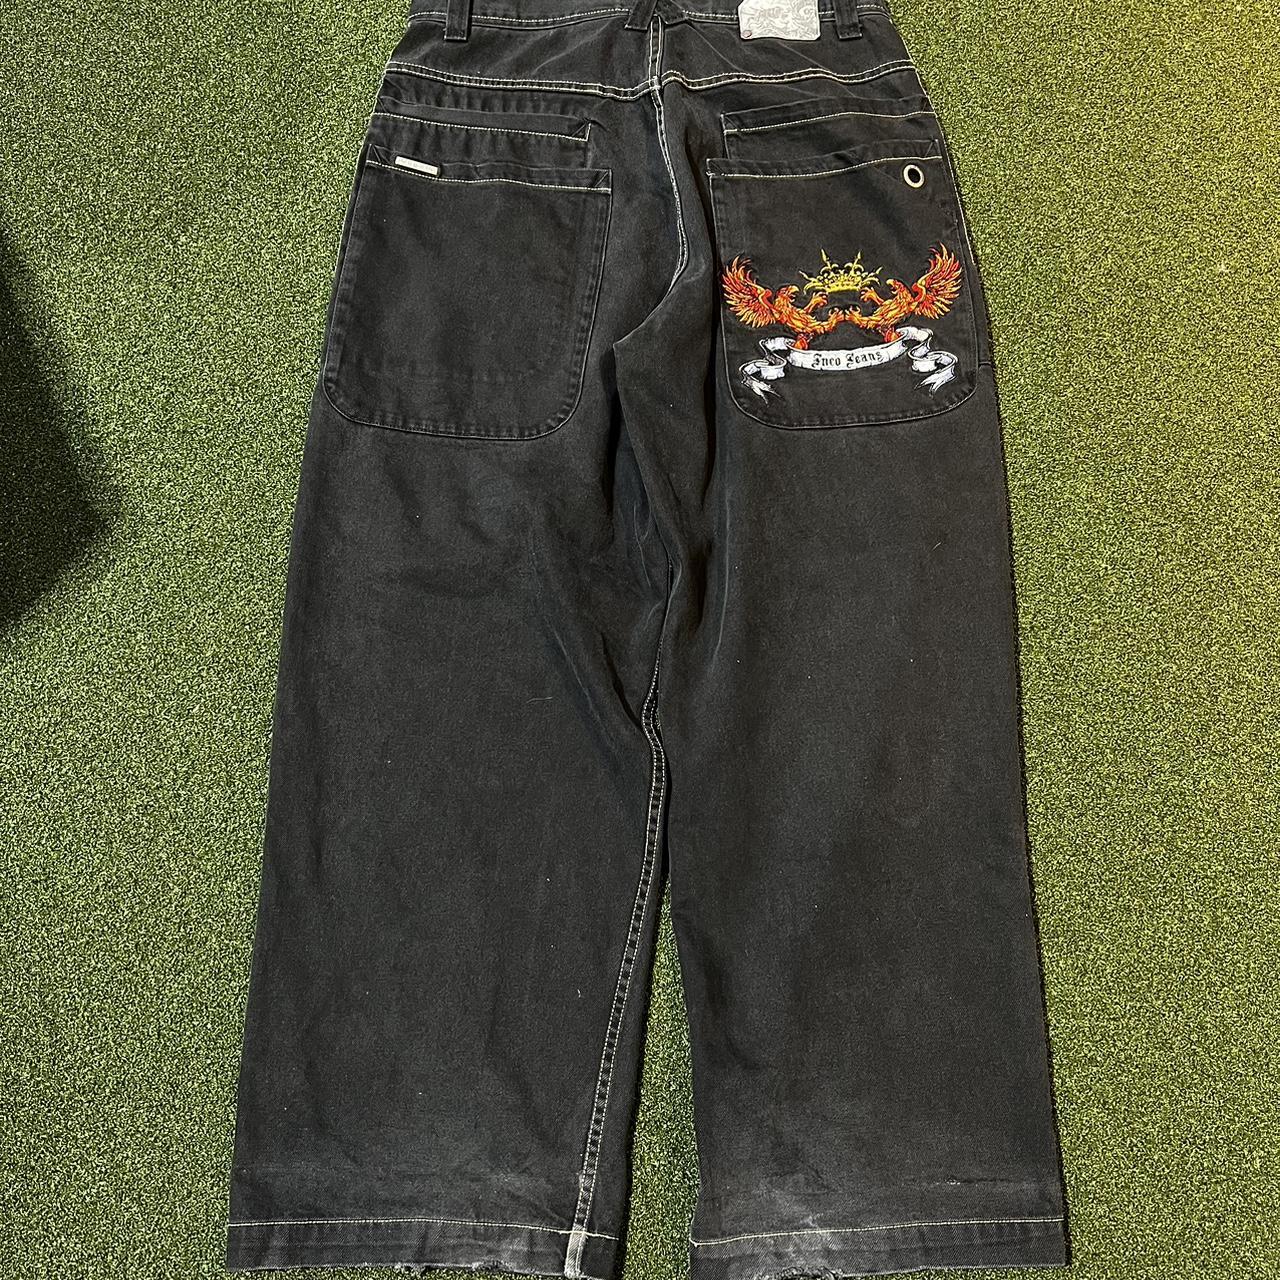 Crazy phoenix embroidered jnco jeans Tagged 38x32... - Depop